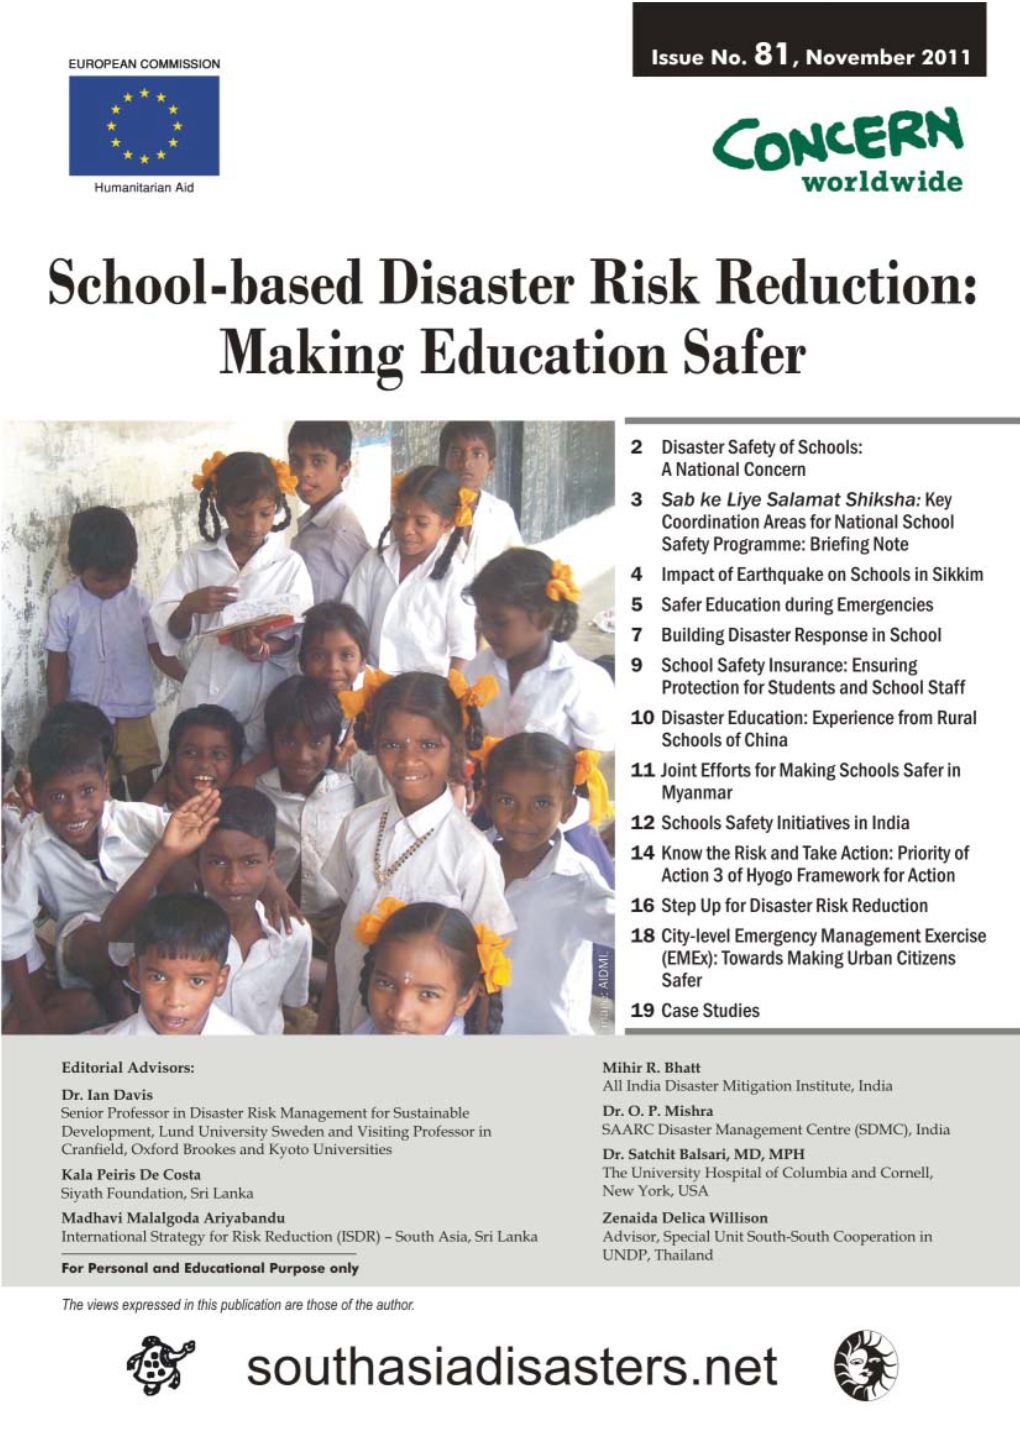 Disaster Safety of Schools: a National Concern Hildren Are the Most Valuable Casset and Are Amongst the Most Vulnerable Segments of Society